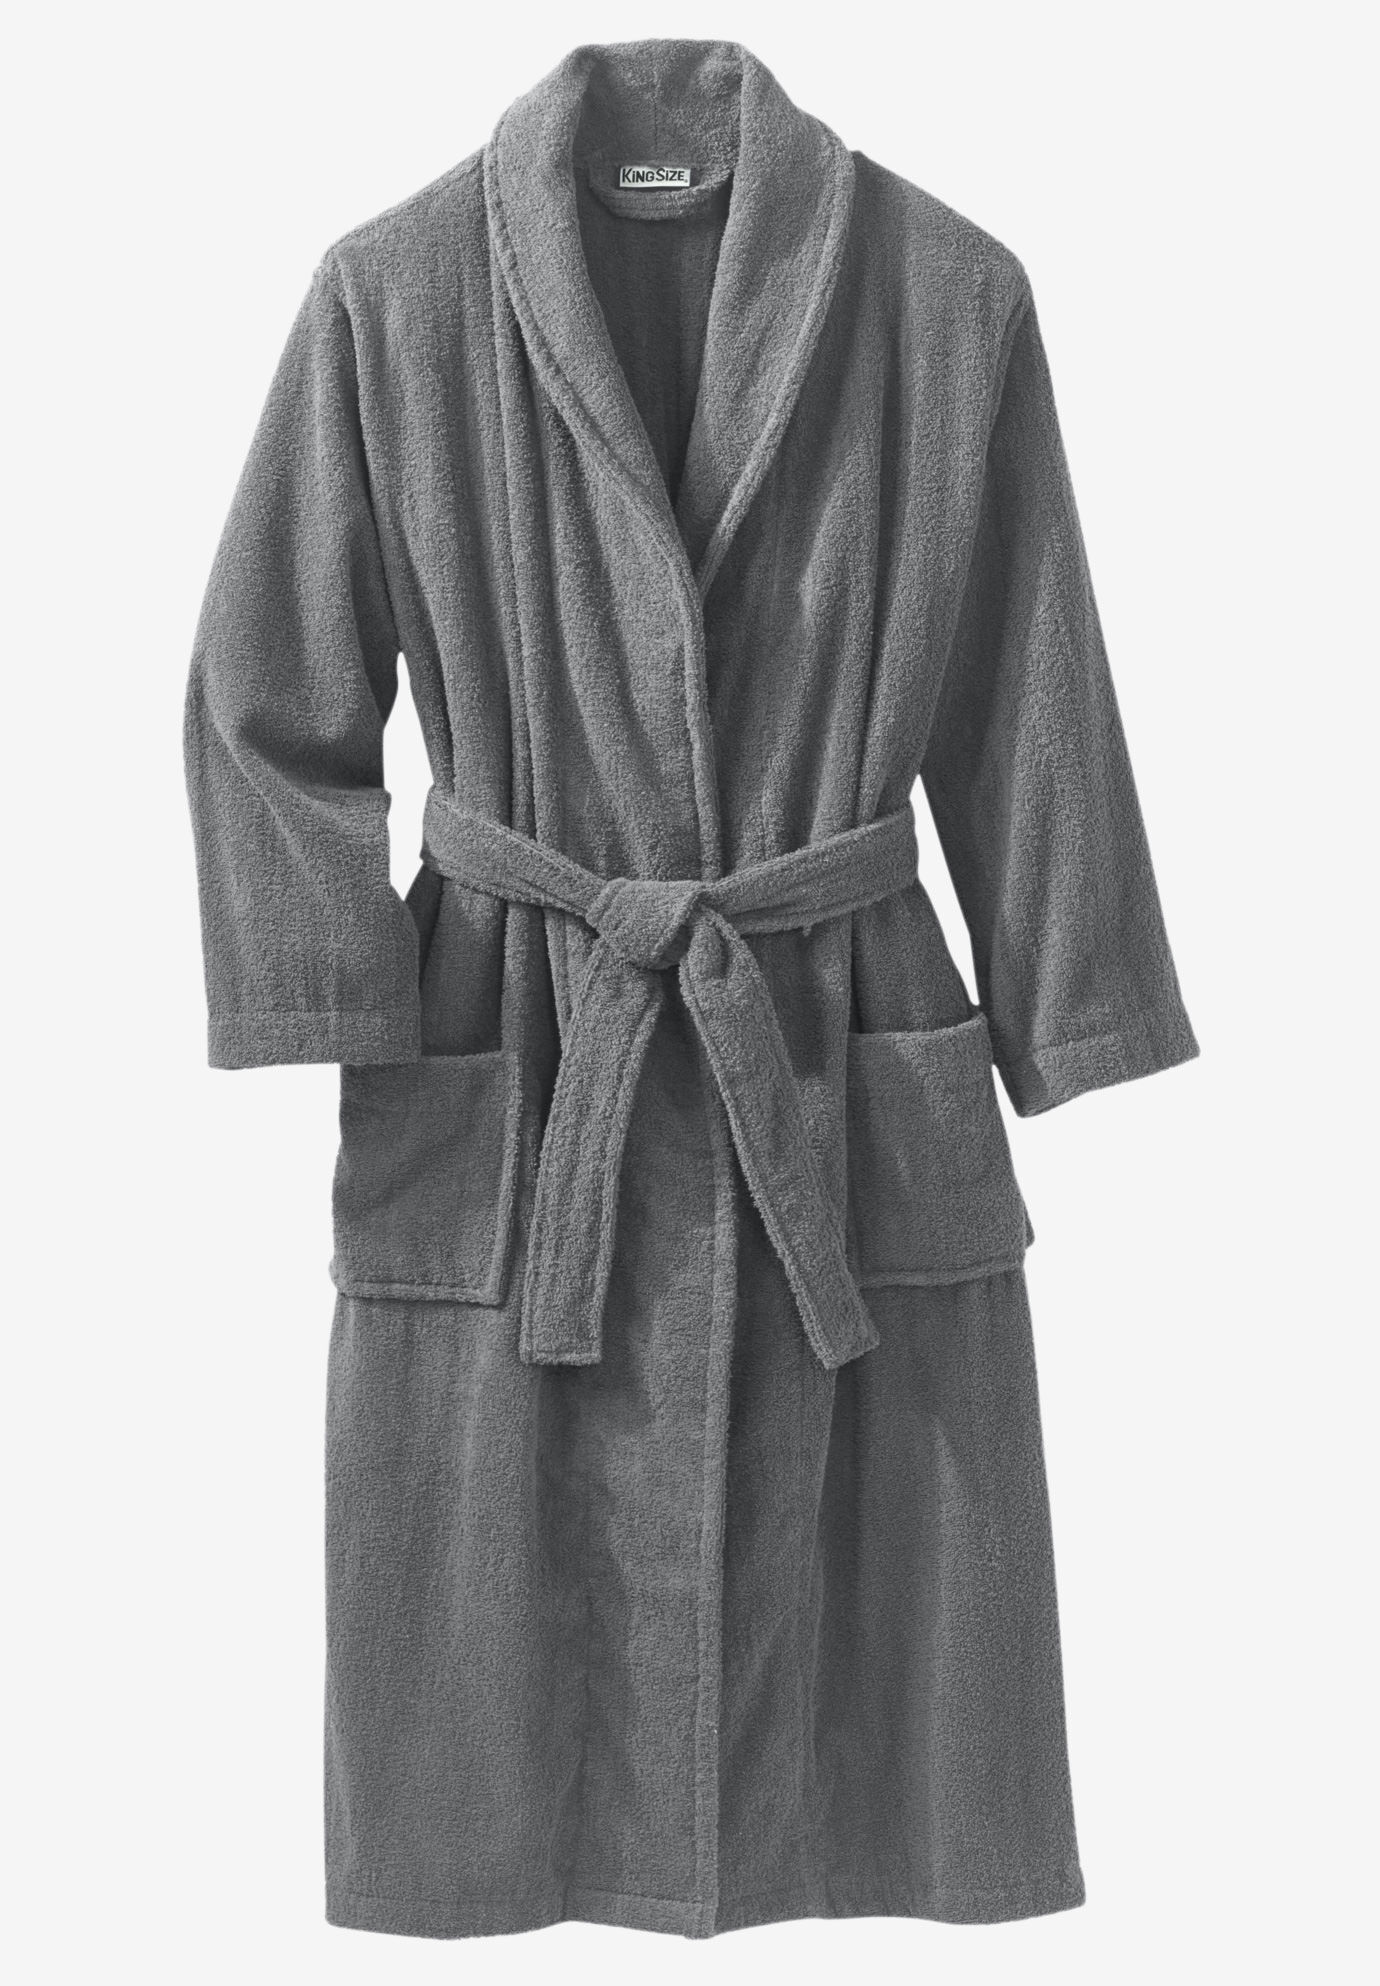 Mens Sleepy Joes Luxury Thick Super Soft Feel Dressing Gowns Robes Wraps M-5XL 